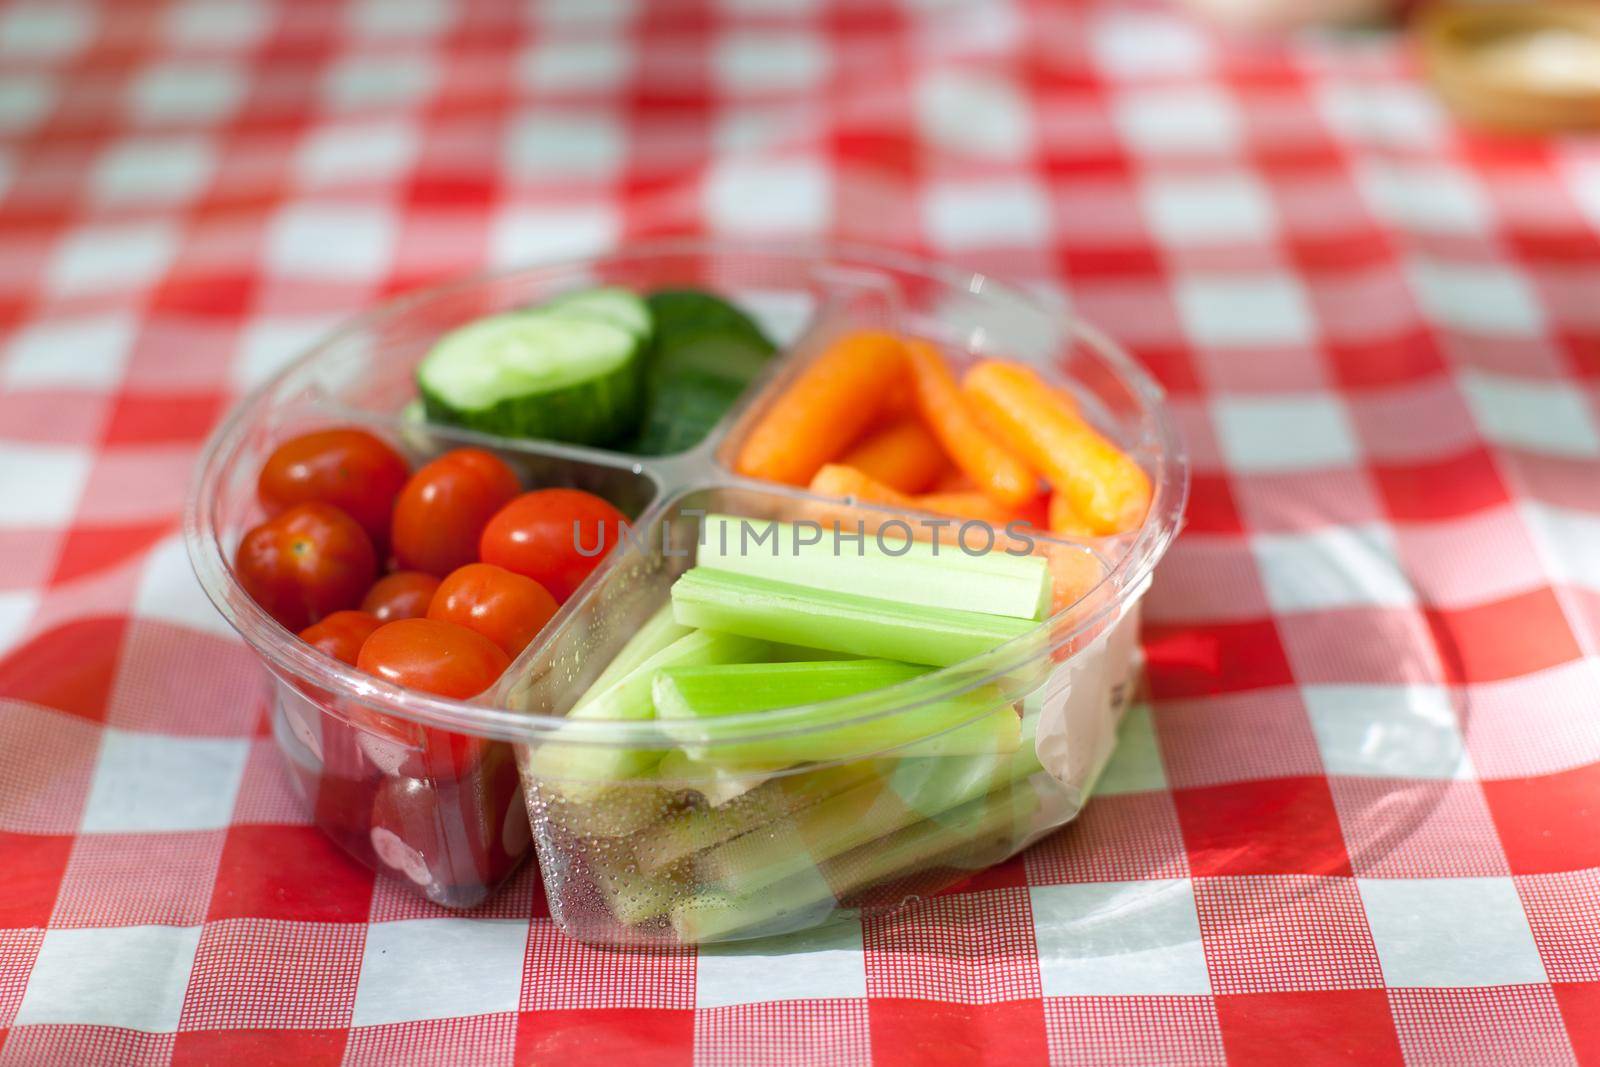  veggies in a tray with dipping sauce on a colorful checkered cloth